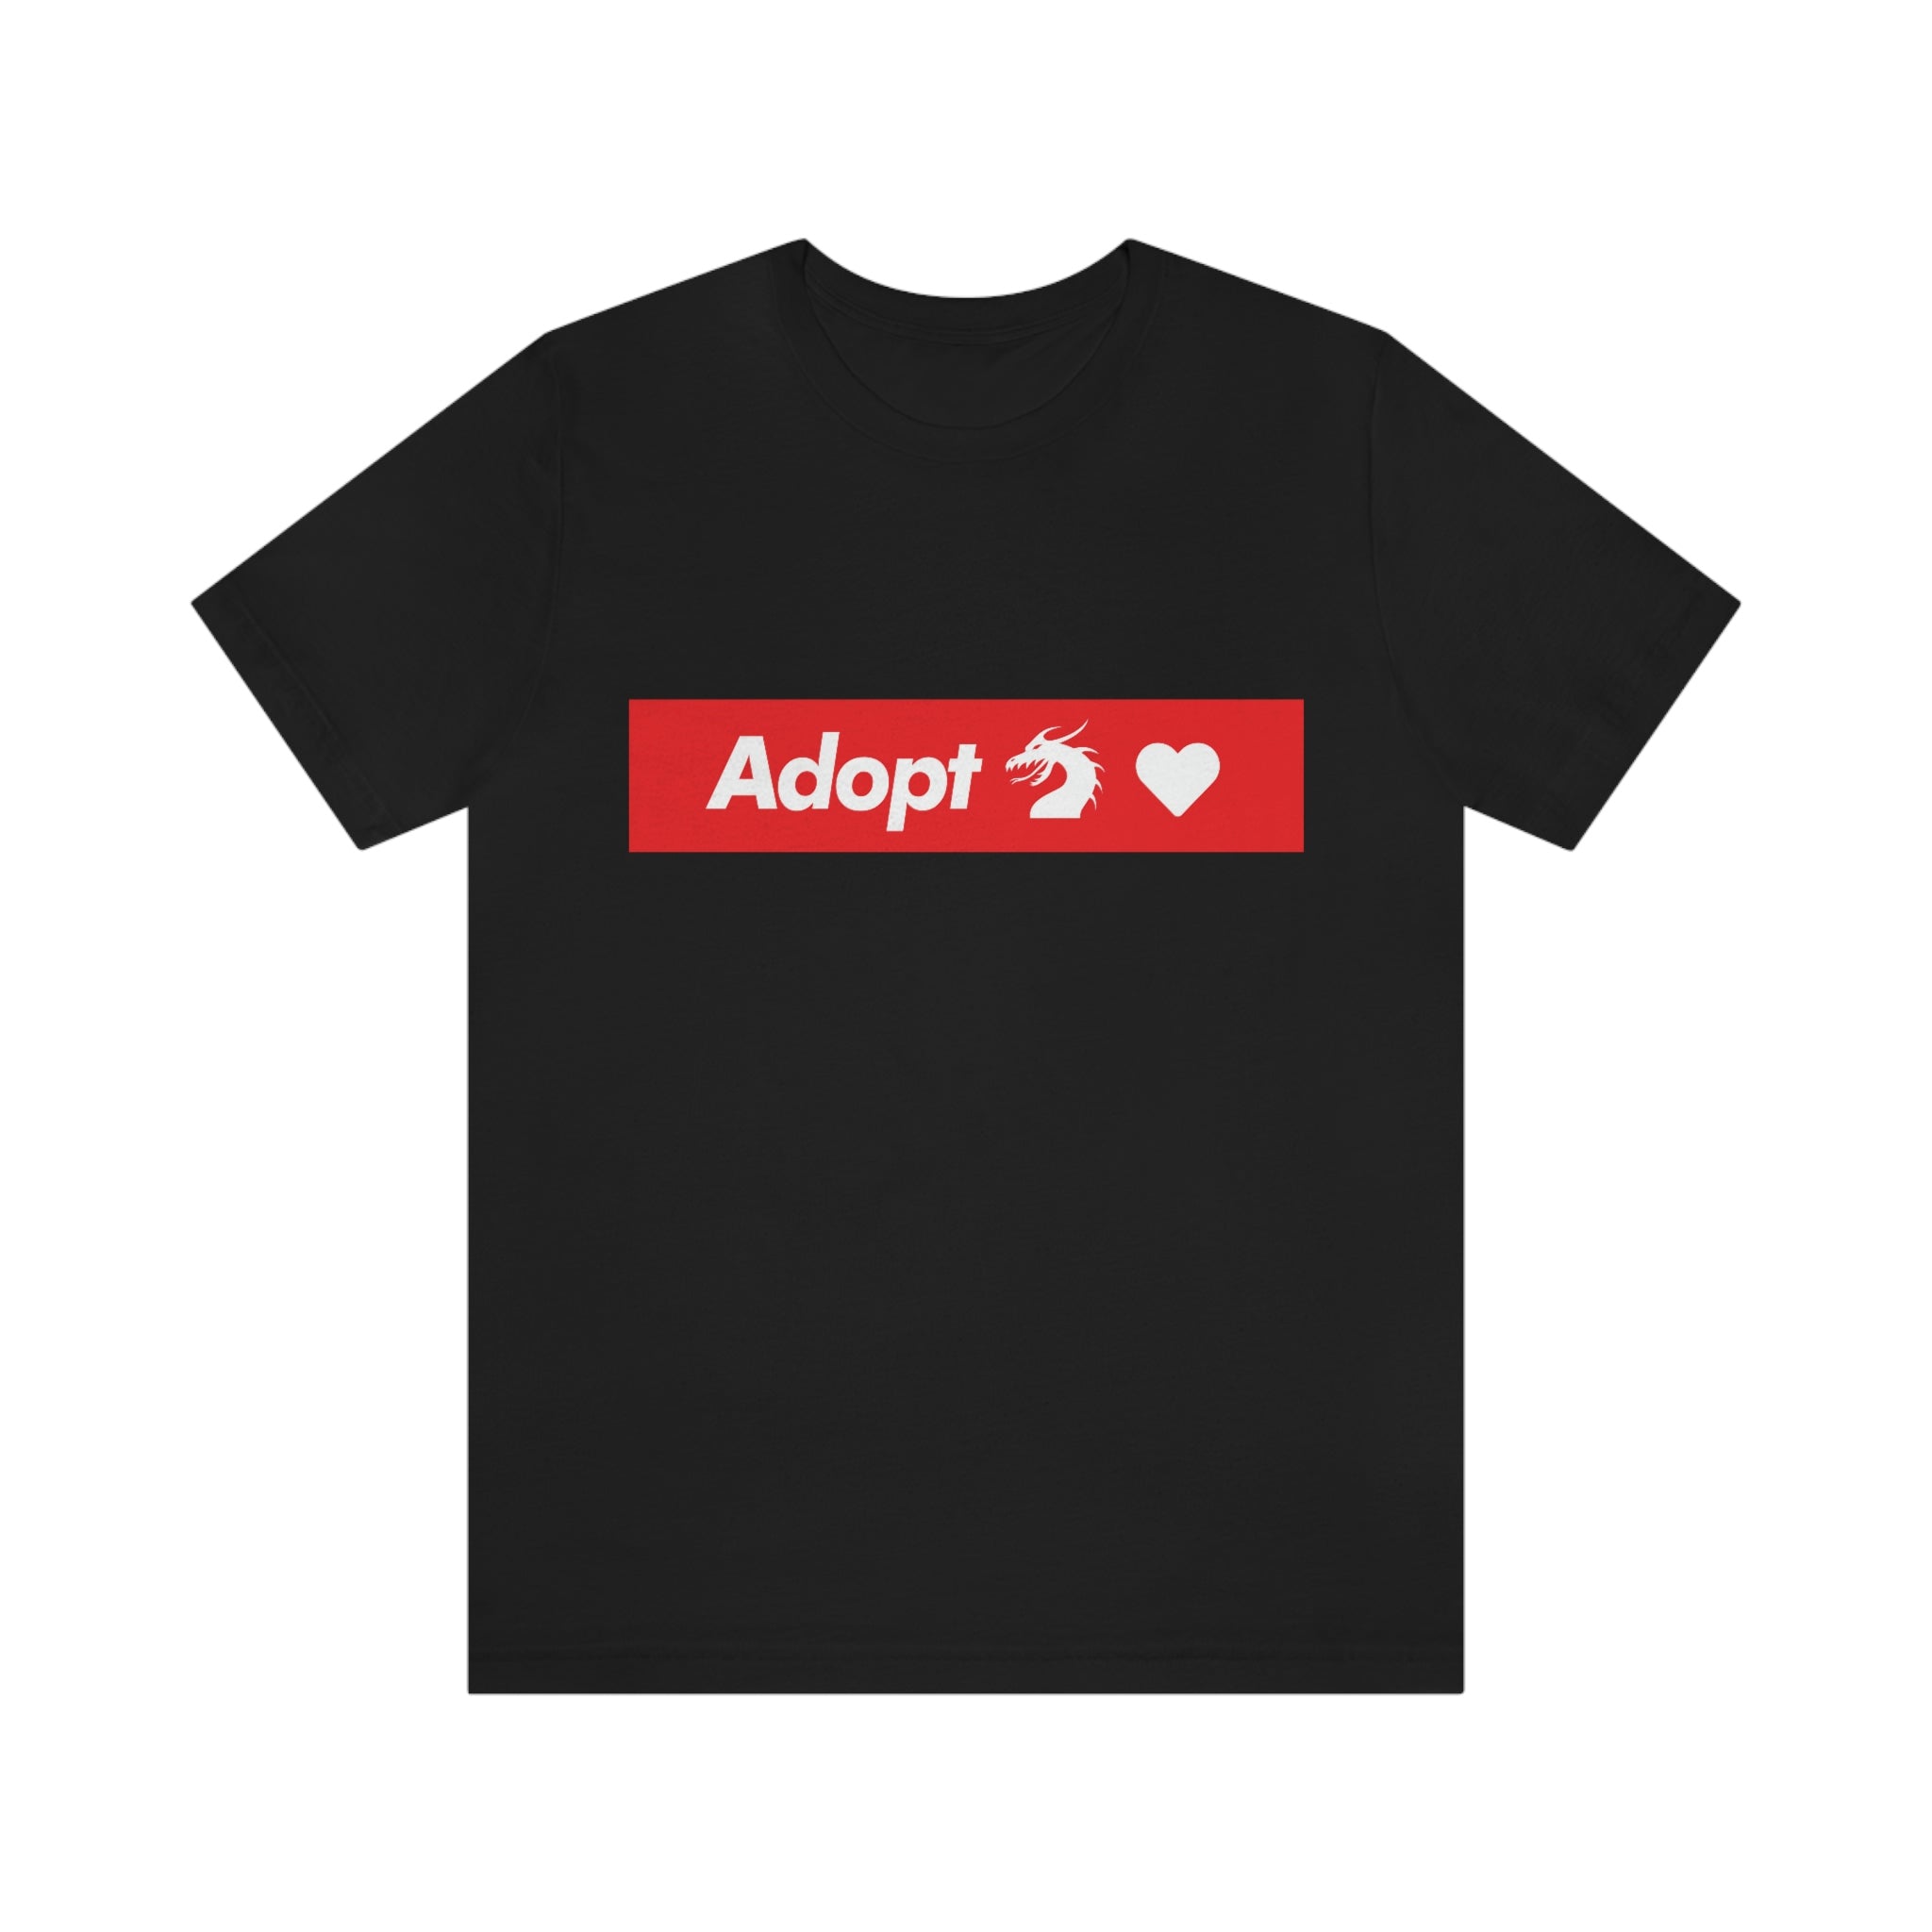 Adopt Love Rescue Dragon! RED BANNER - Unisex 100% Cotton T-Shirt Supporting Humane Animal Shelters